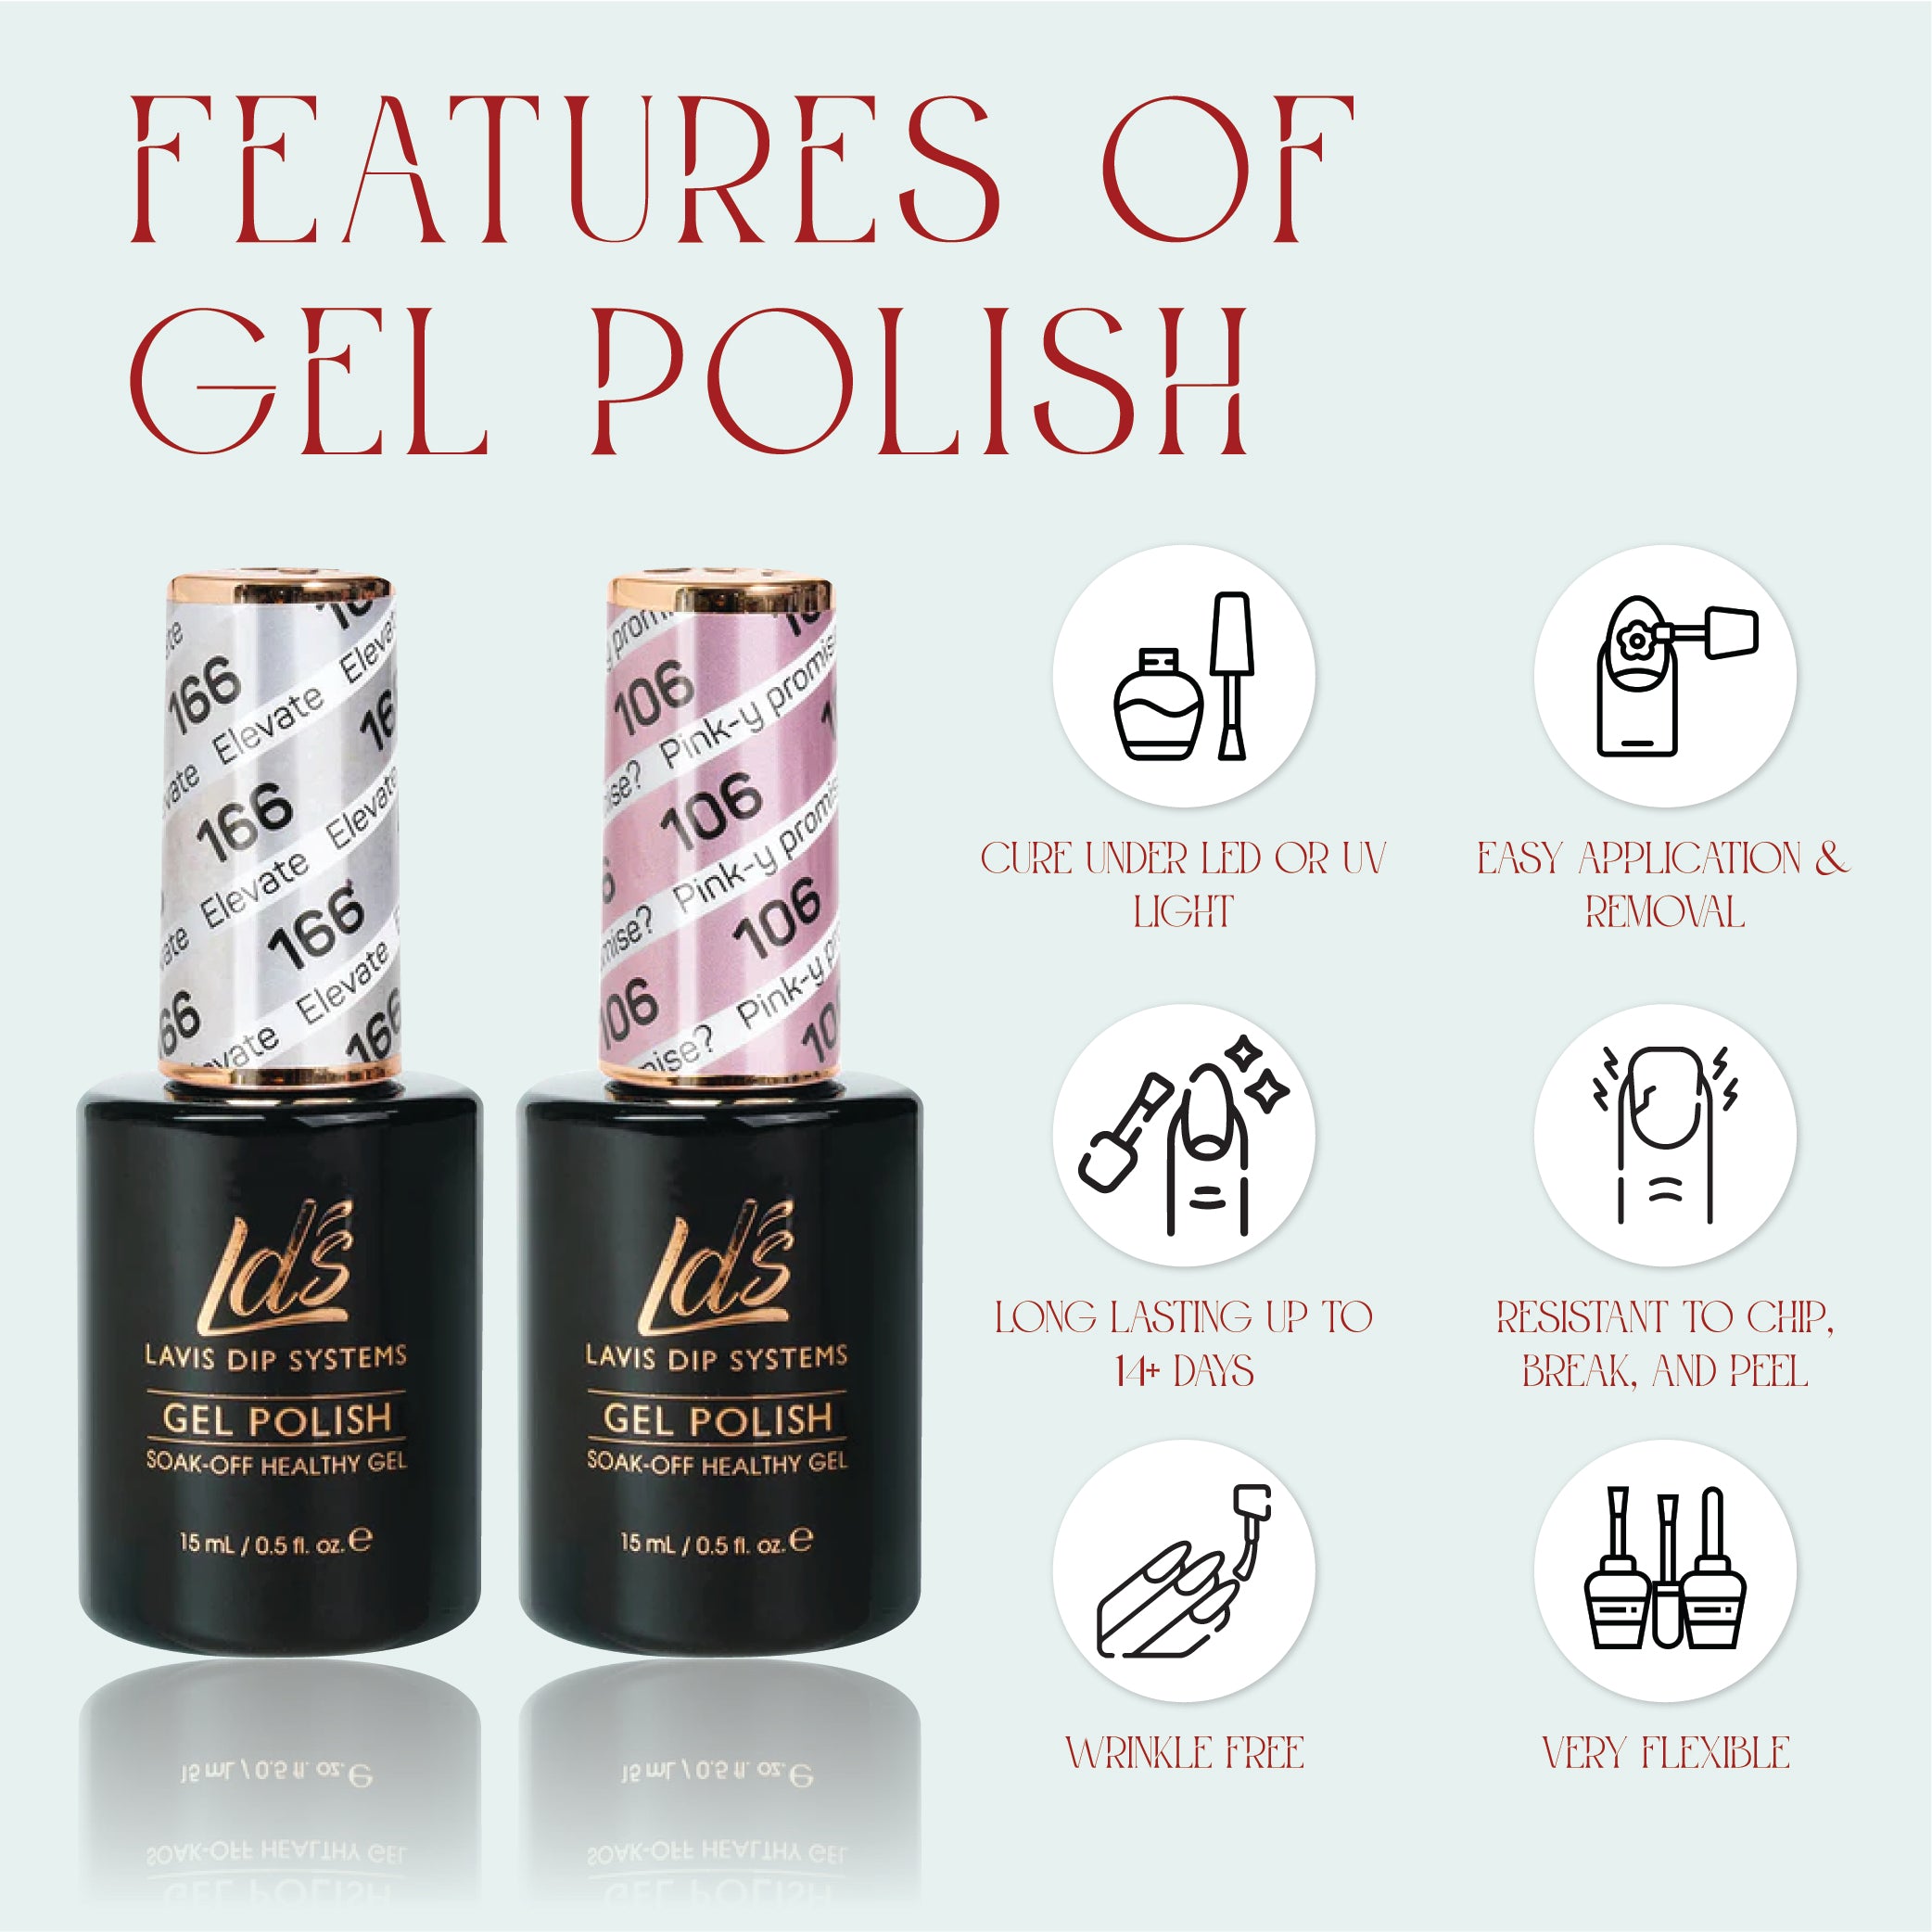 LDS 041 Perfect Plum - LDS Healthy Gel Polish & Matching Nail Lacquer Duo Set - 0.5oz